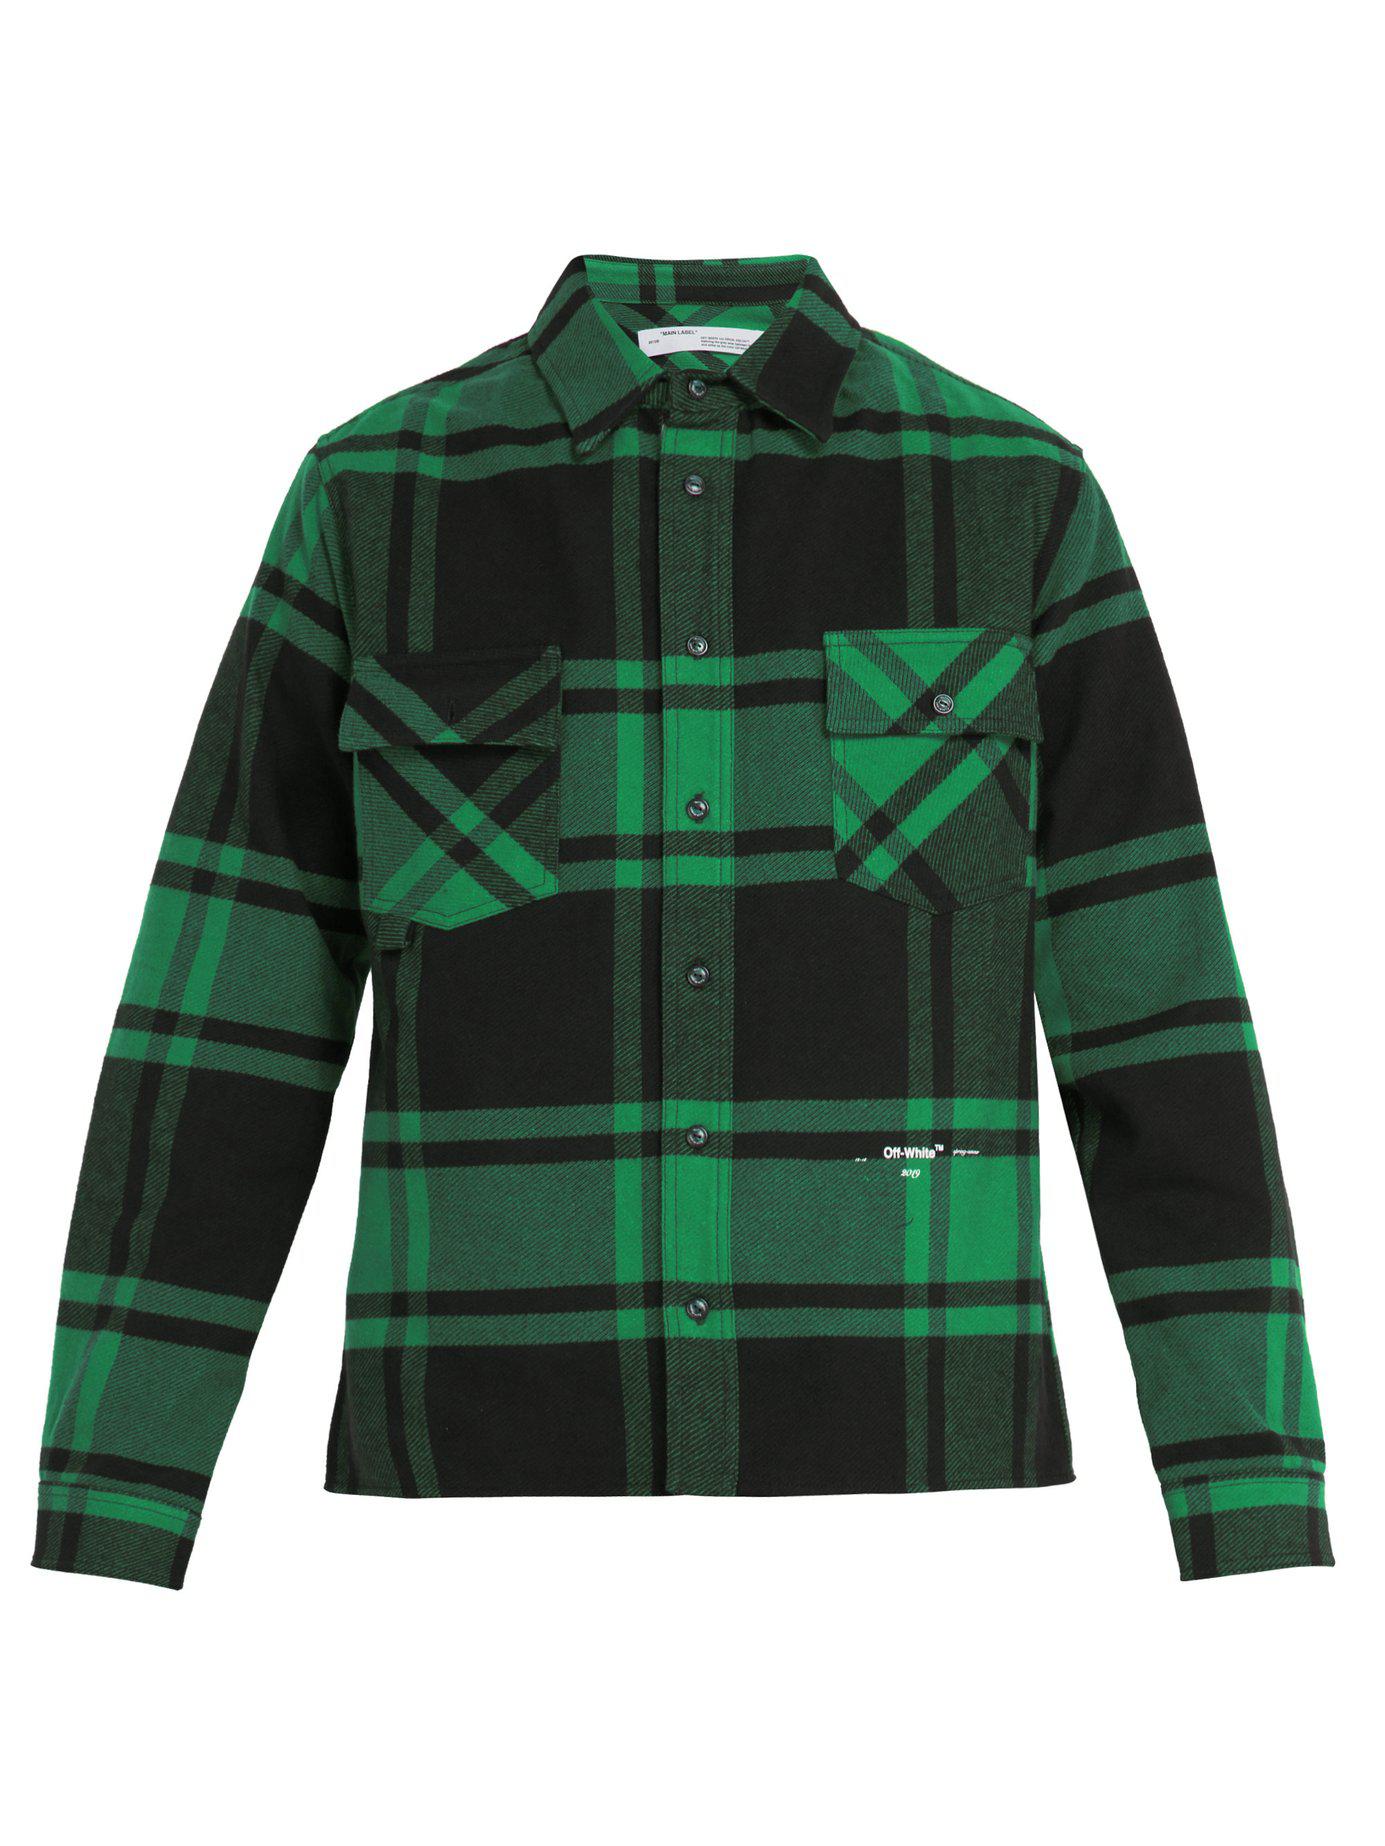 Off-White Virgil Abloh Checked Cotton Blend Flannel Shirt in Green for Men Lyst